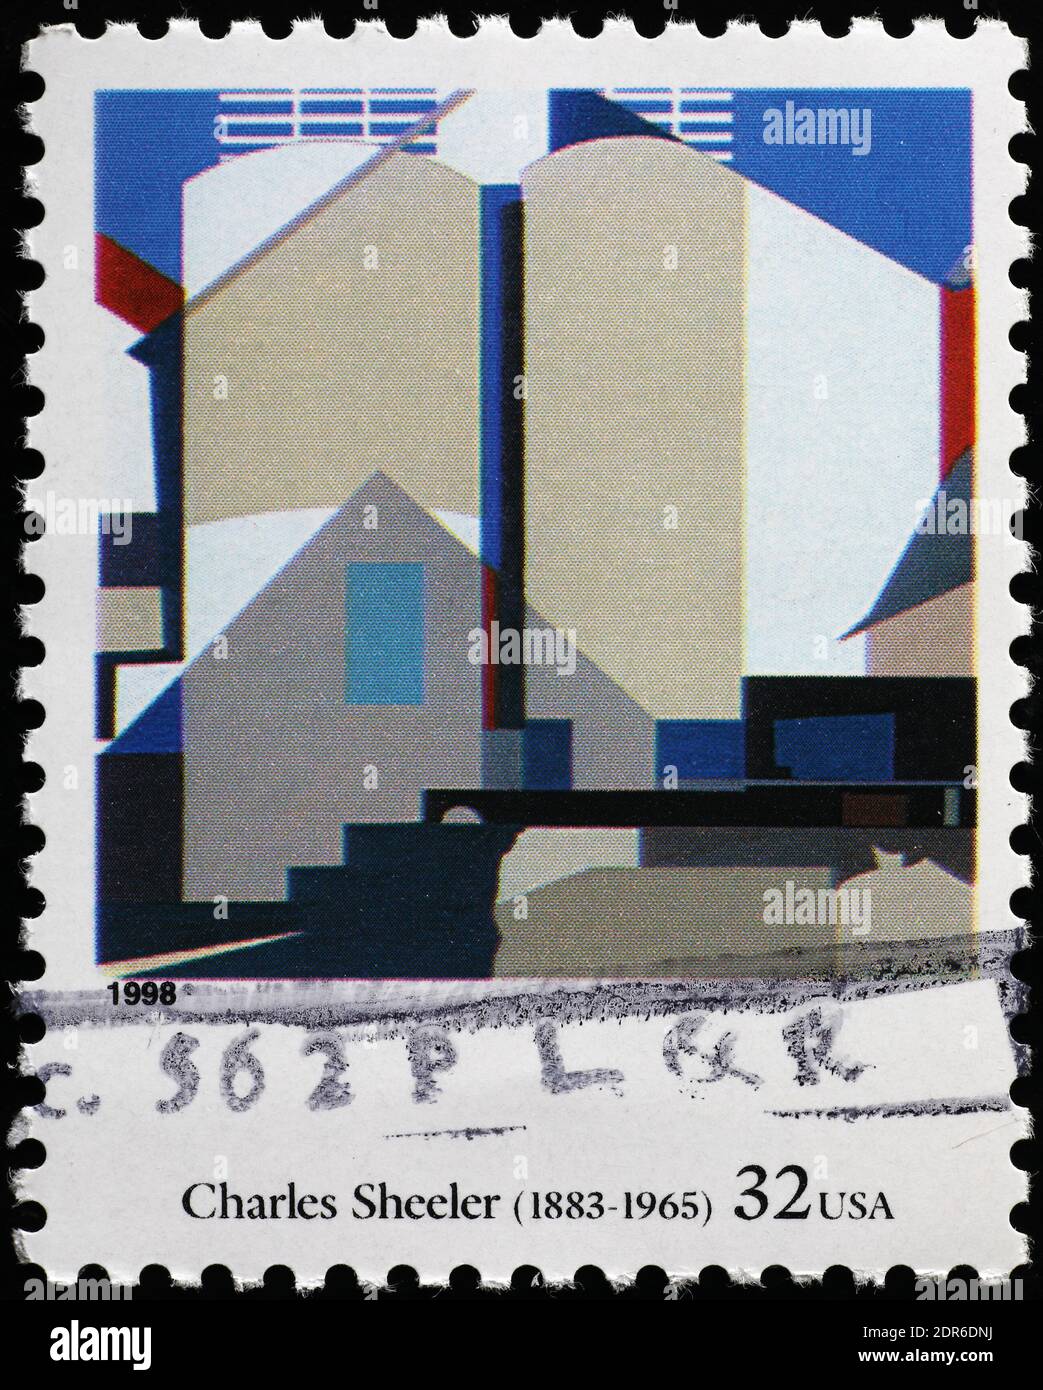 Two Against the White by Charles Sheeler on american stamp Stock Photo